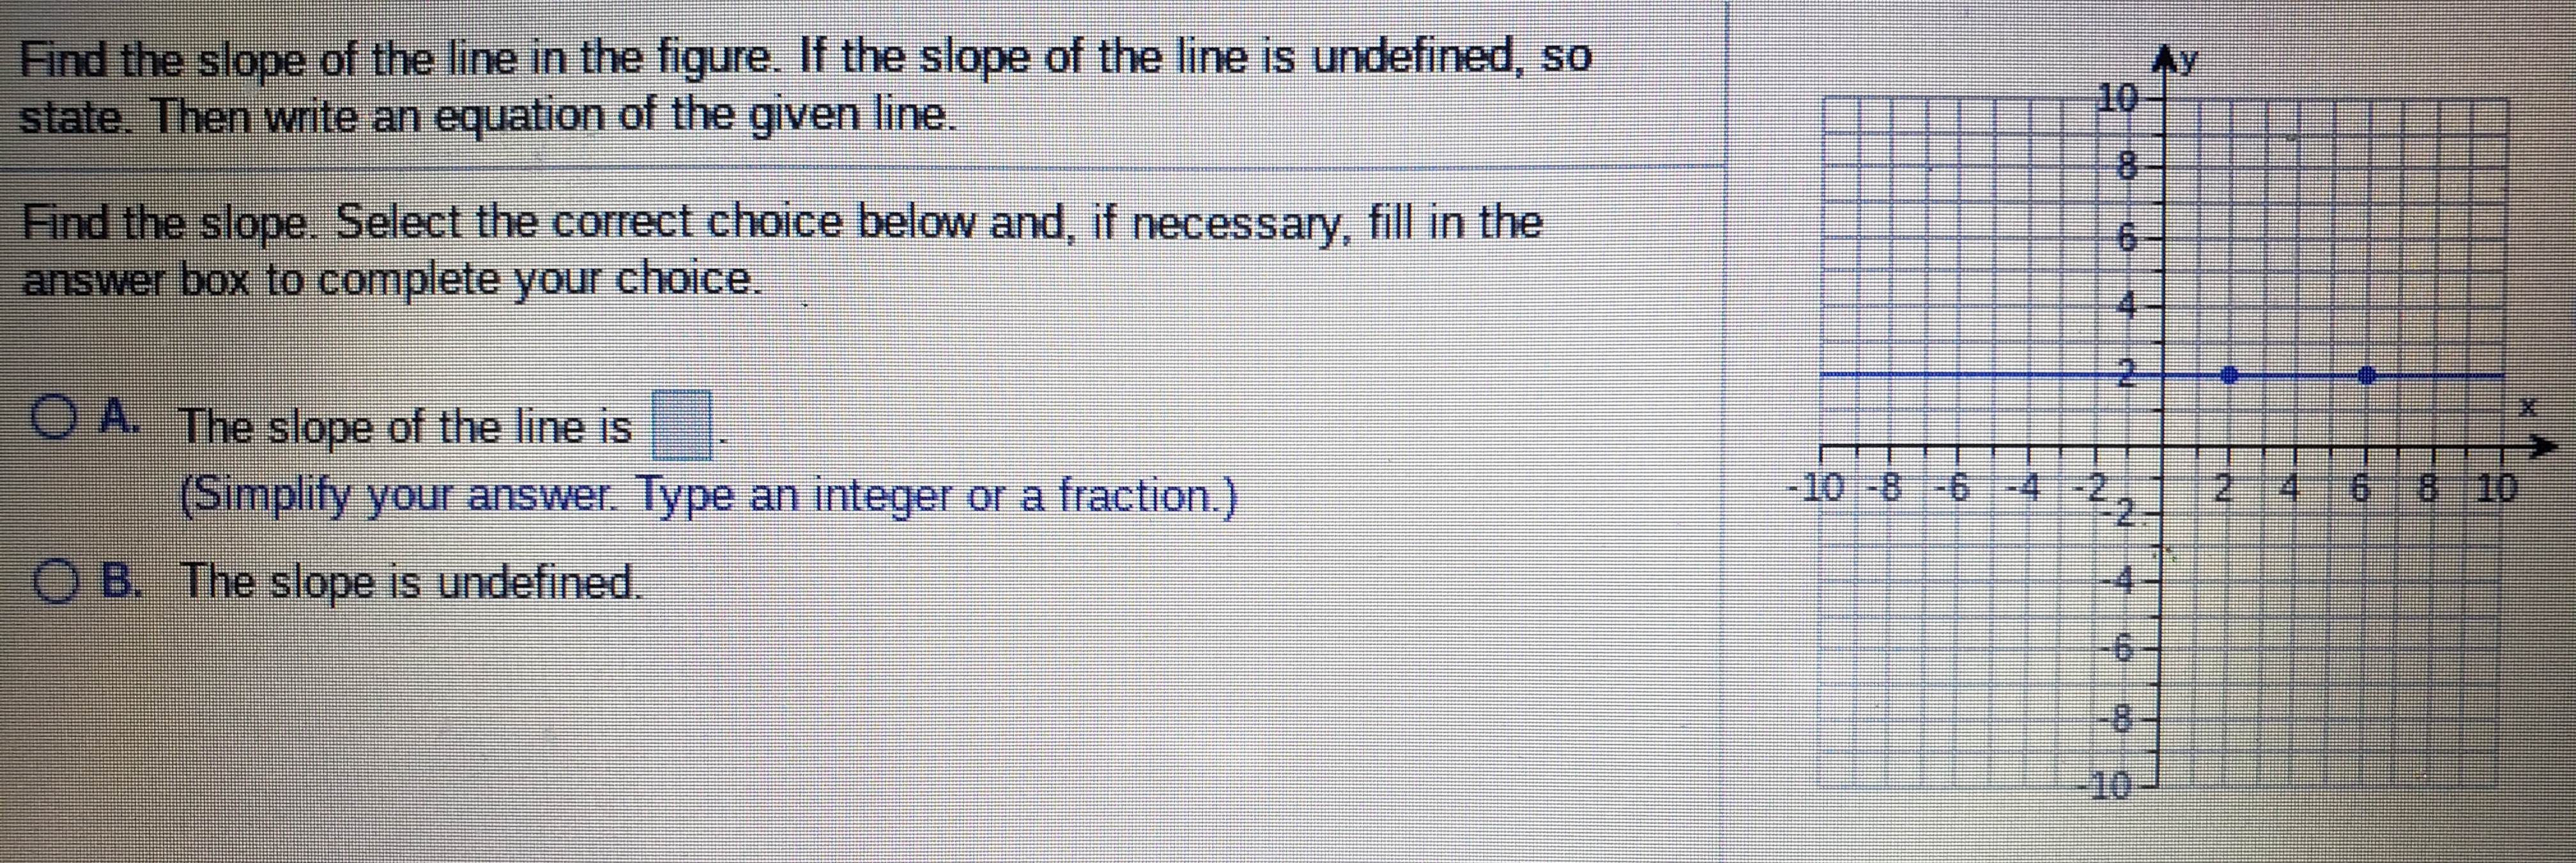 Answered: Find the slope of the line in the  bartleby